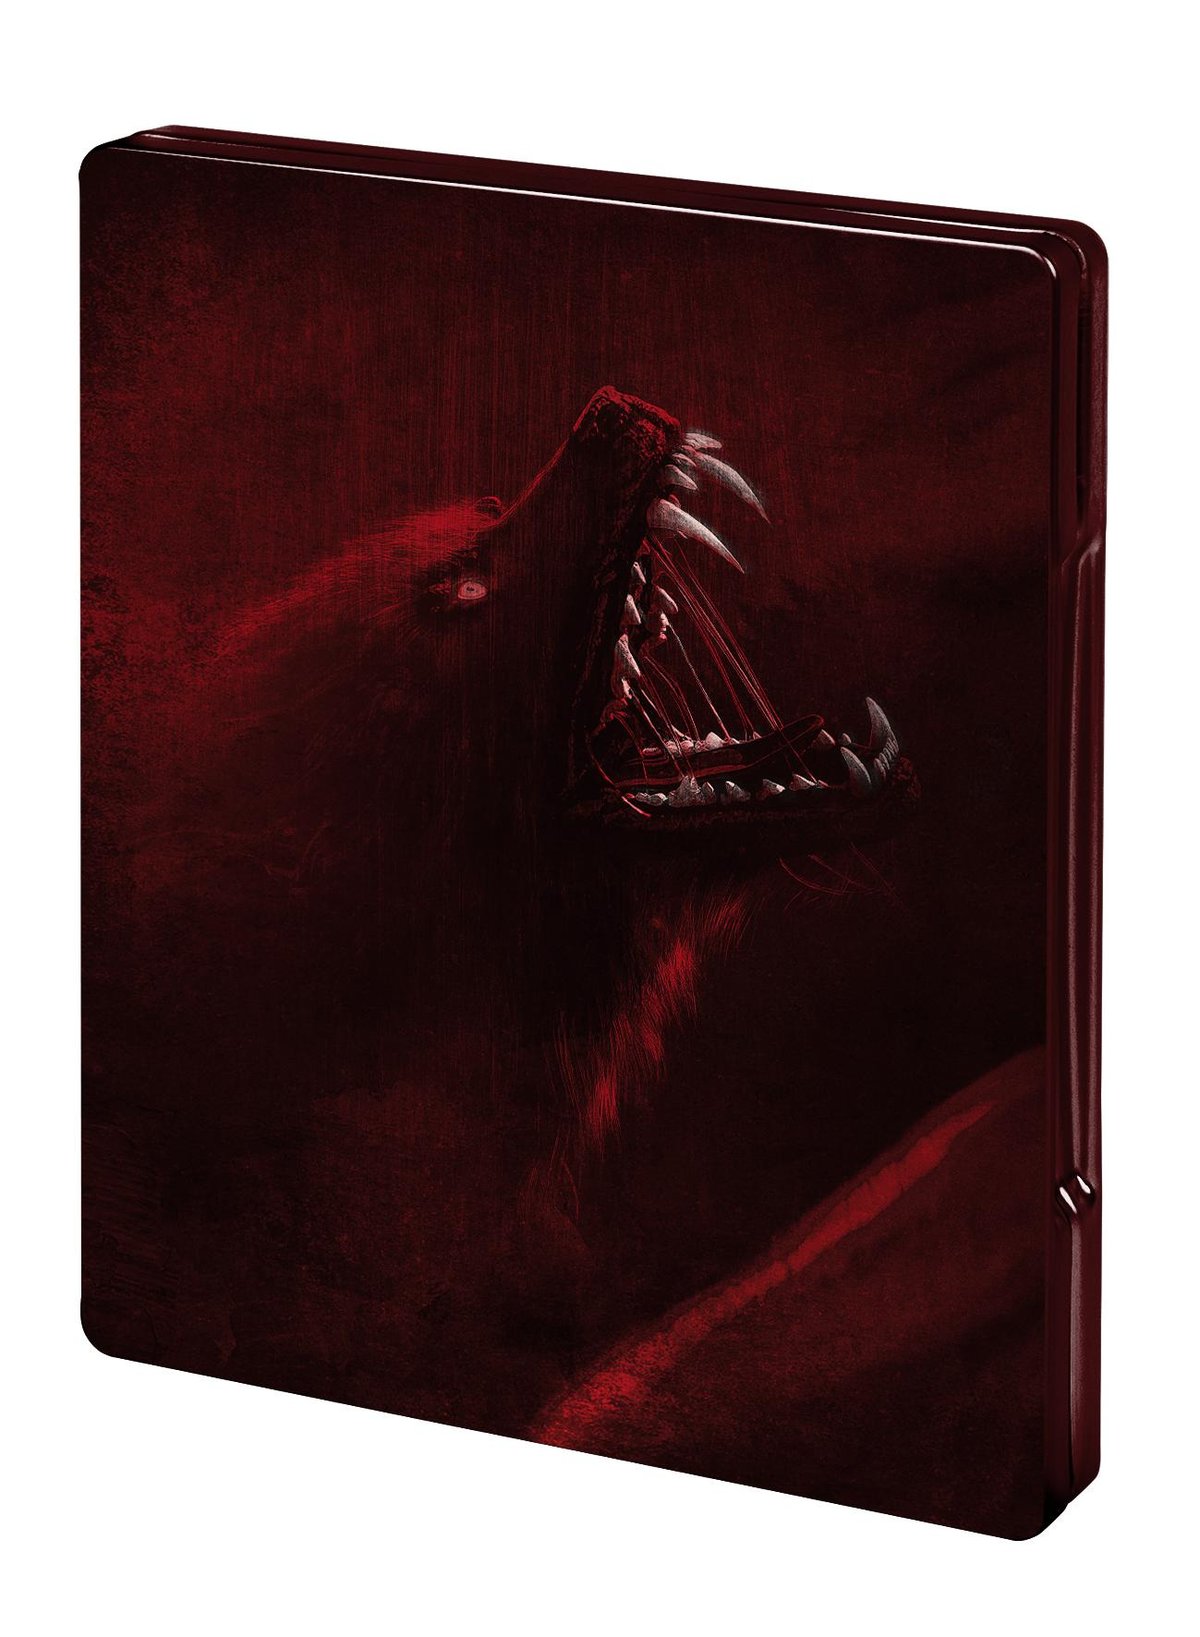 Howling, The - Das Tier - Limited Steelbook Edition (4K UHD)